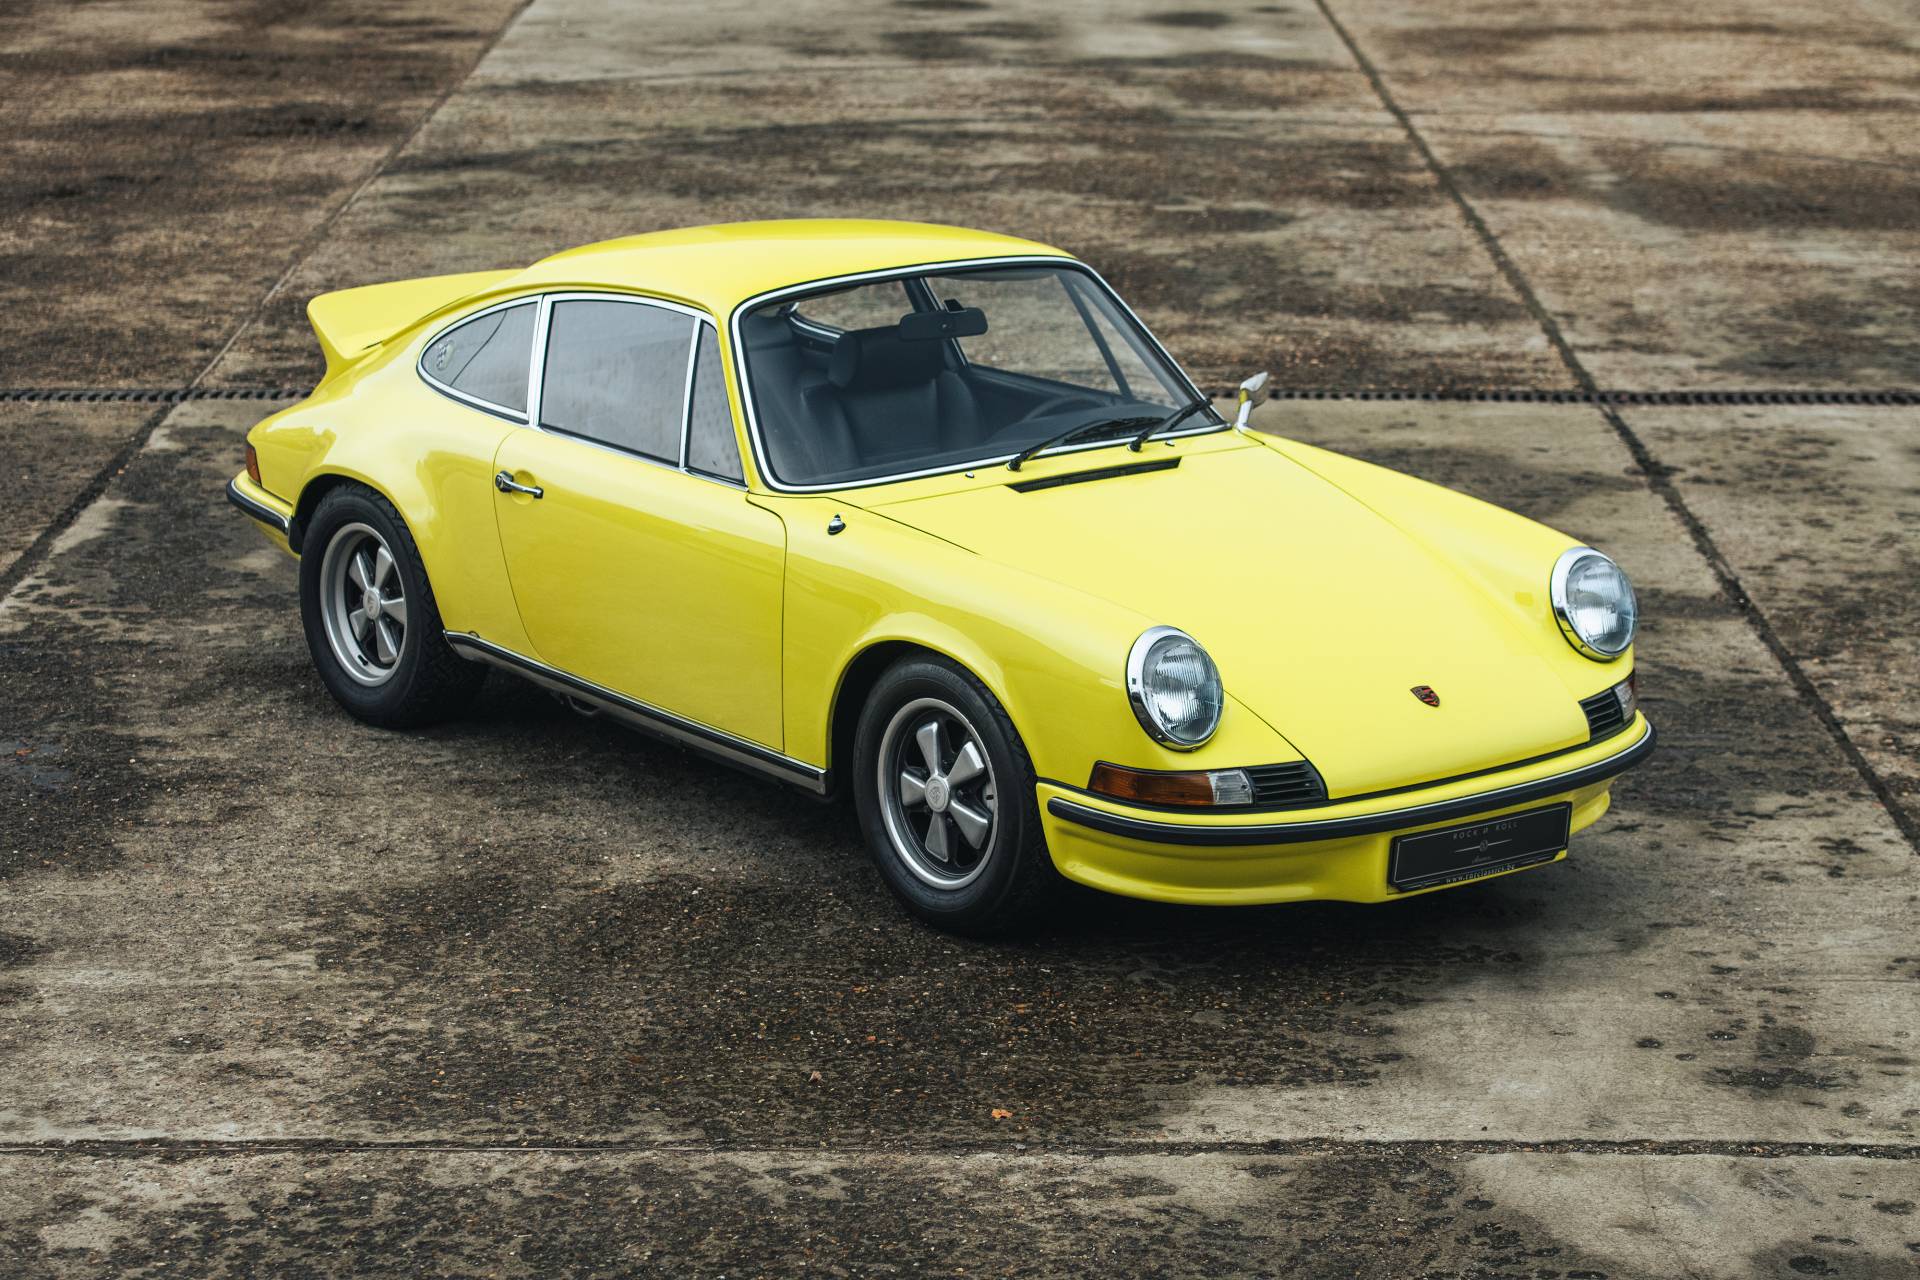 For Sale: Porsche 911 Carrera RS  (Touring) (1973) offered for Price on  request